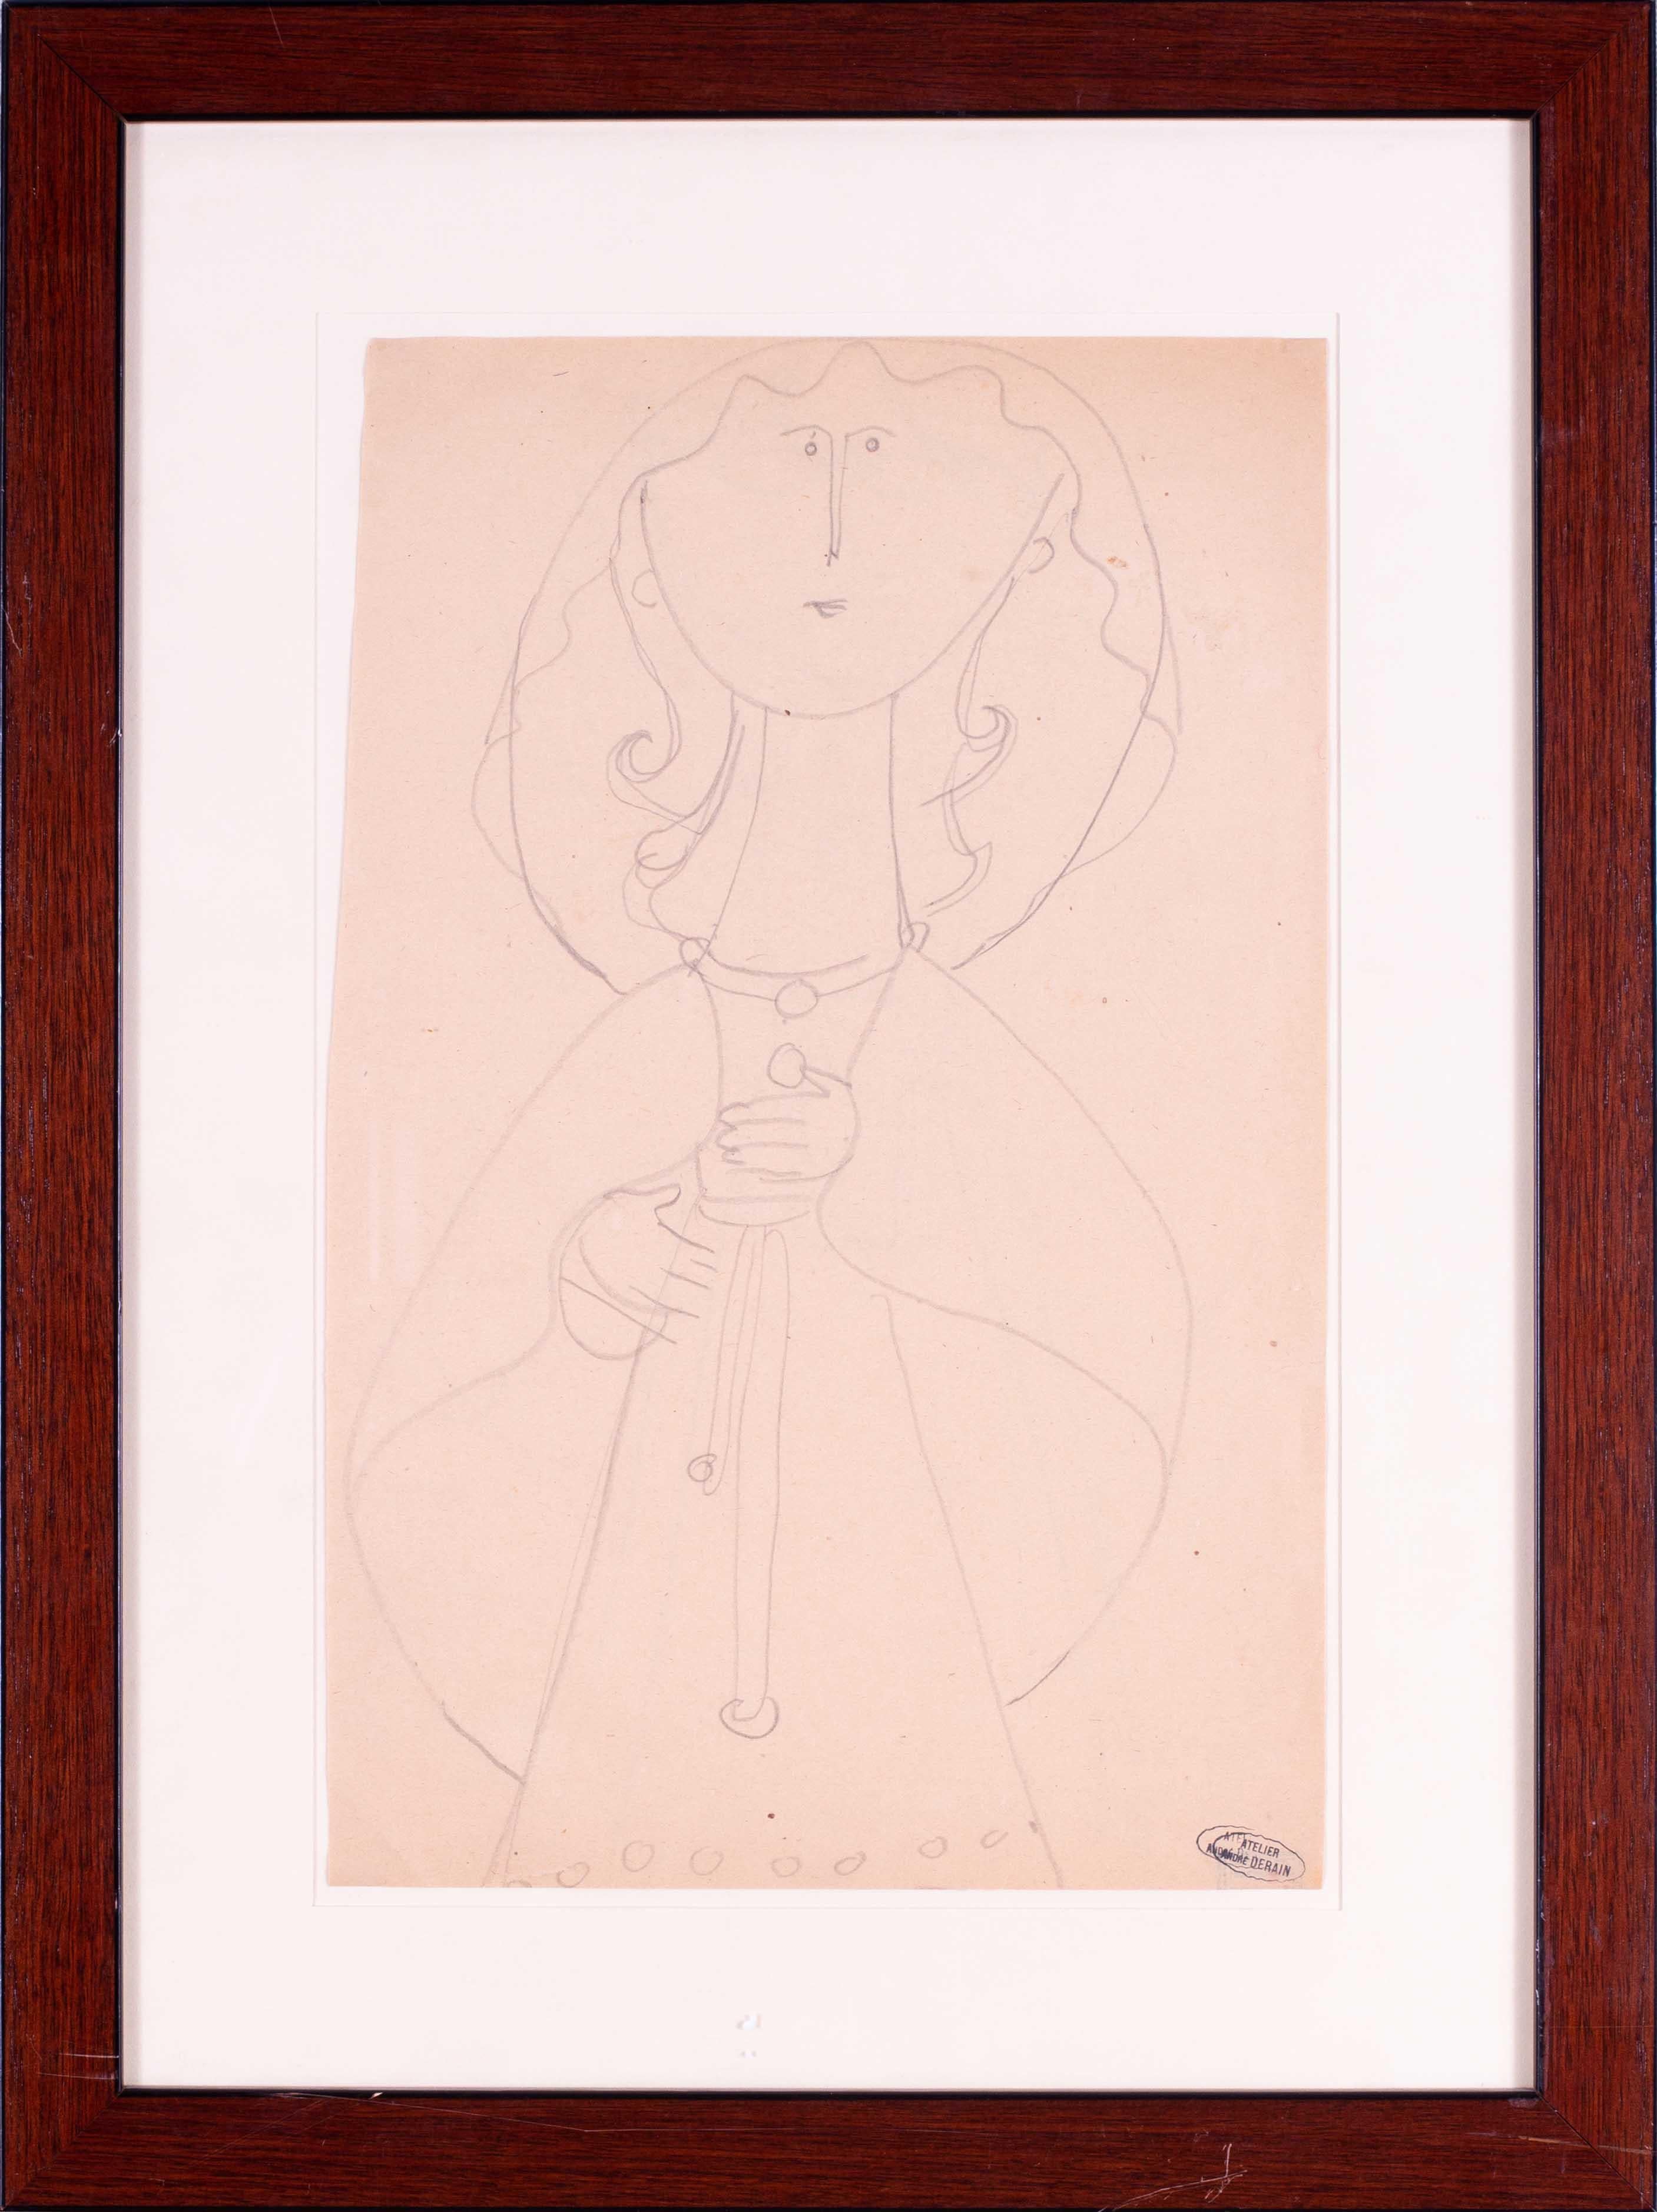 Early 20th Century French Fauvist drawing by Andre Derain of a lady in a dress